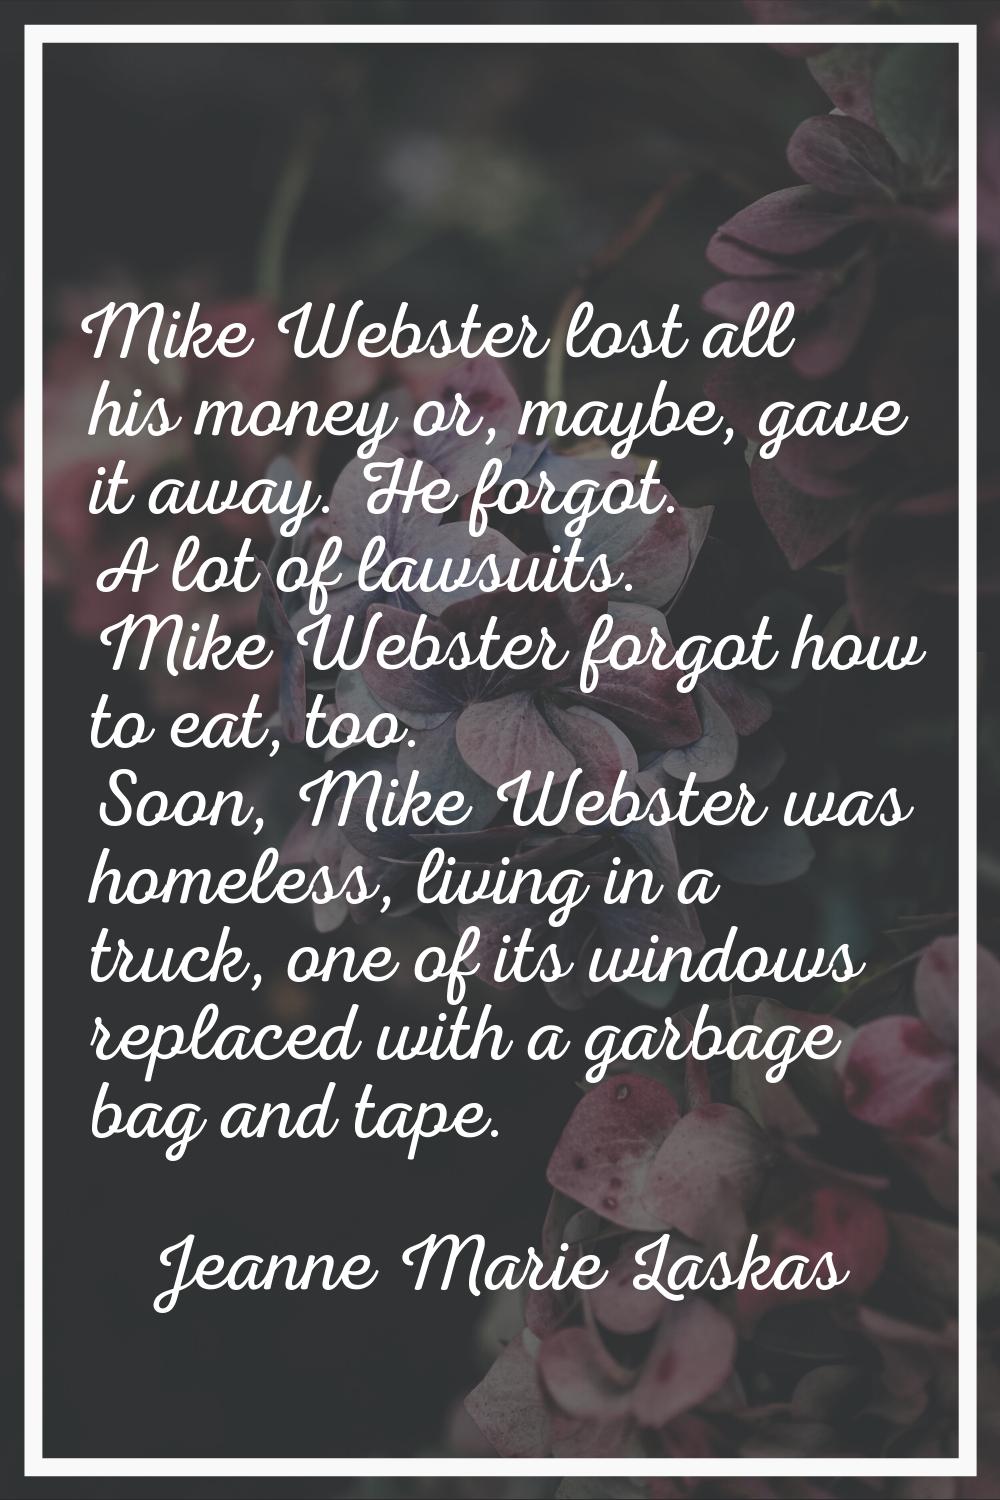 Mike Webster lost all his money or, maybe, gave it away. He forgot. A lot of lawsuits. Mike Webster